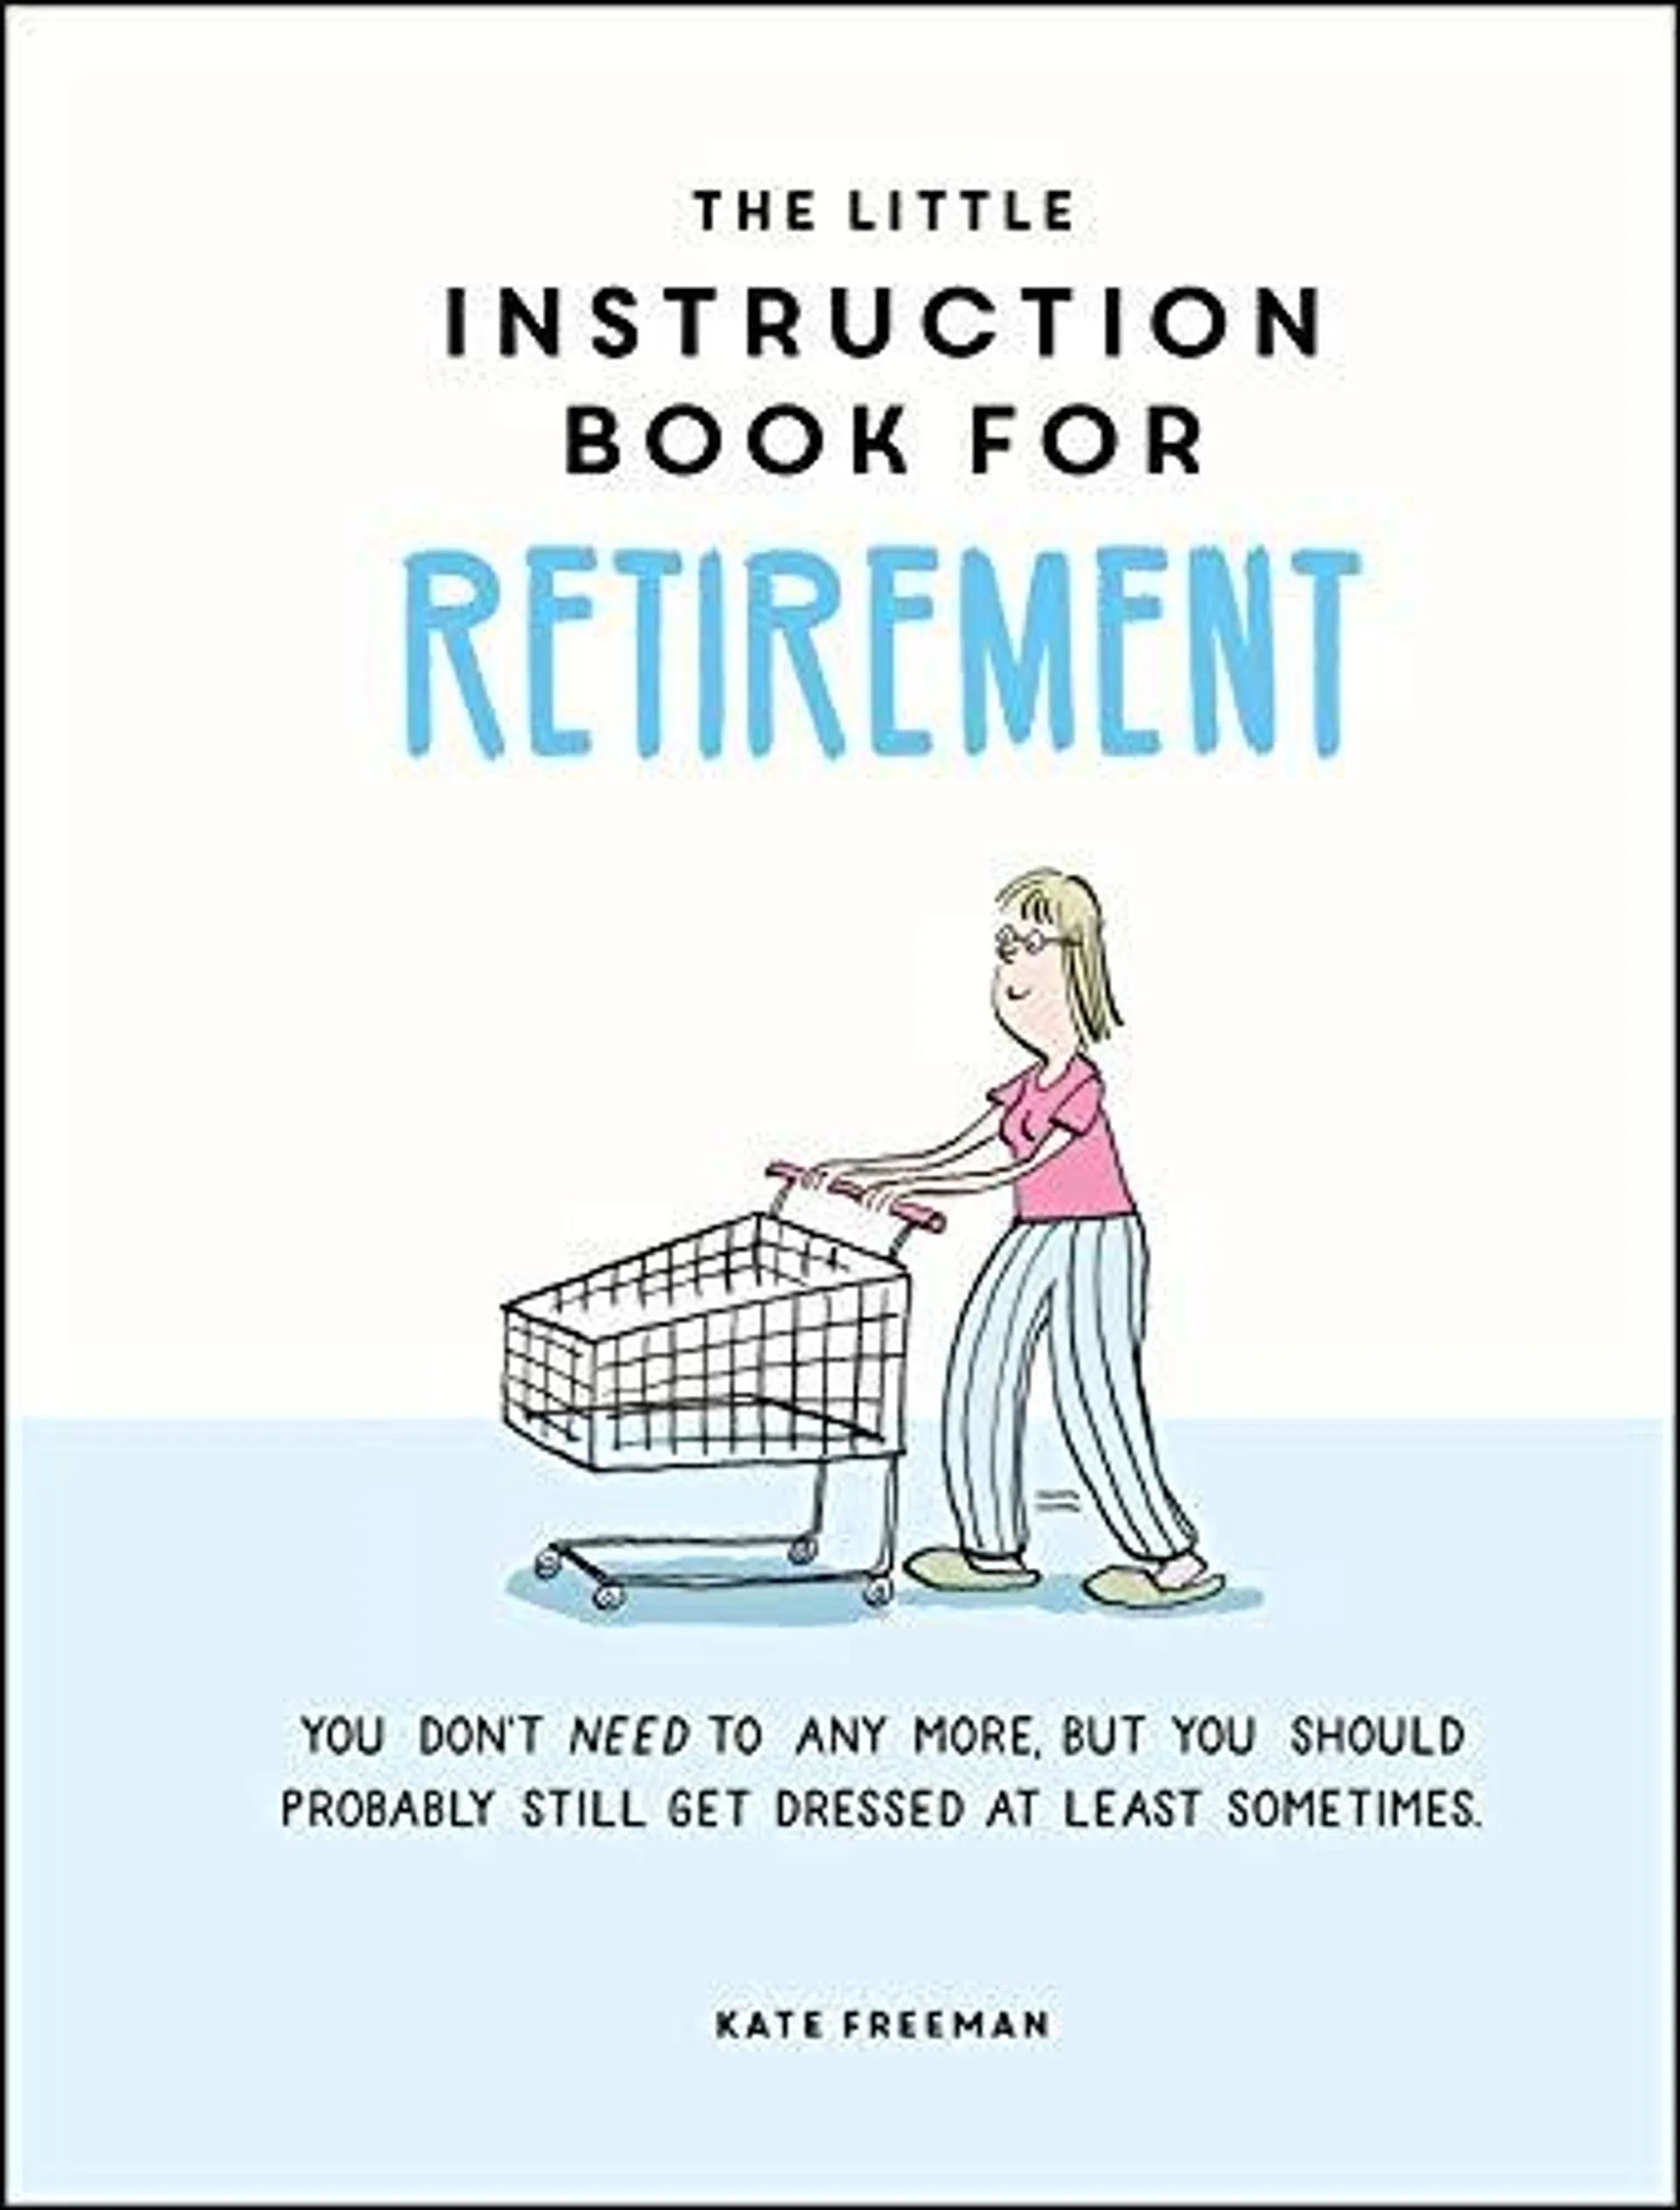 The Little Instruction Book for Retirement by Kate Freeman